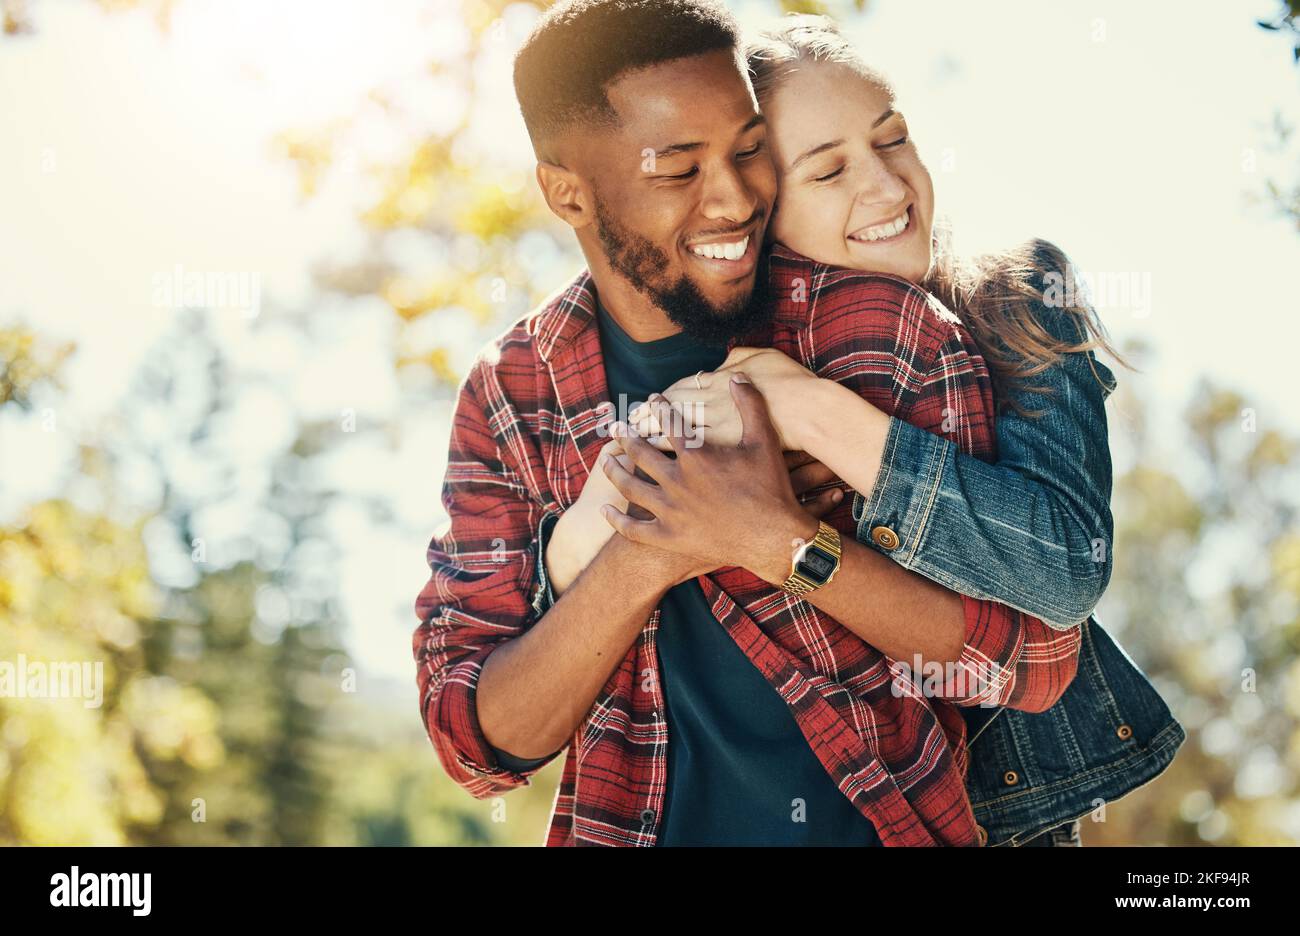 Love, nature and diversity couple hug on outdoor journey together, romantic park date and quality time fun. Sunshine flare, leaf and summer freedom Stock Photo